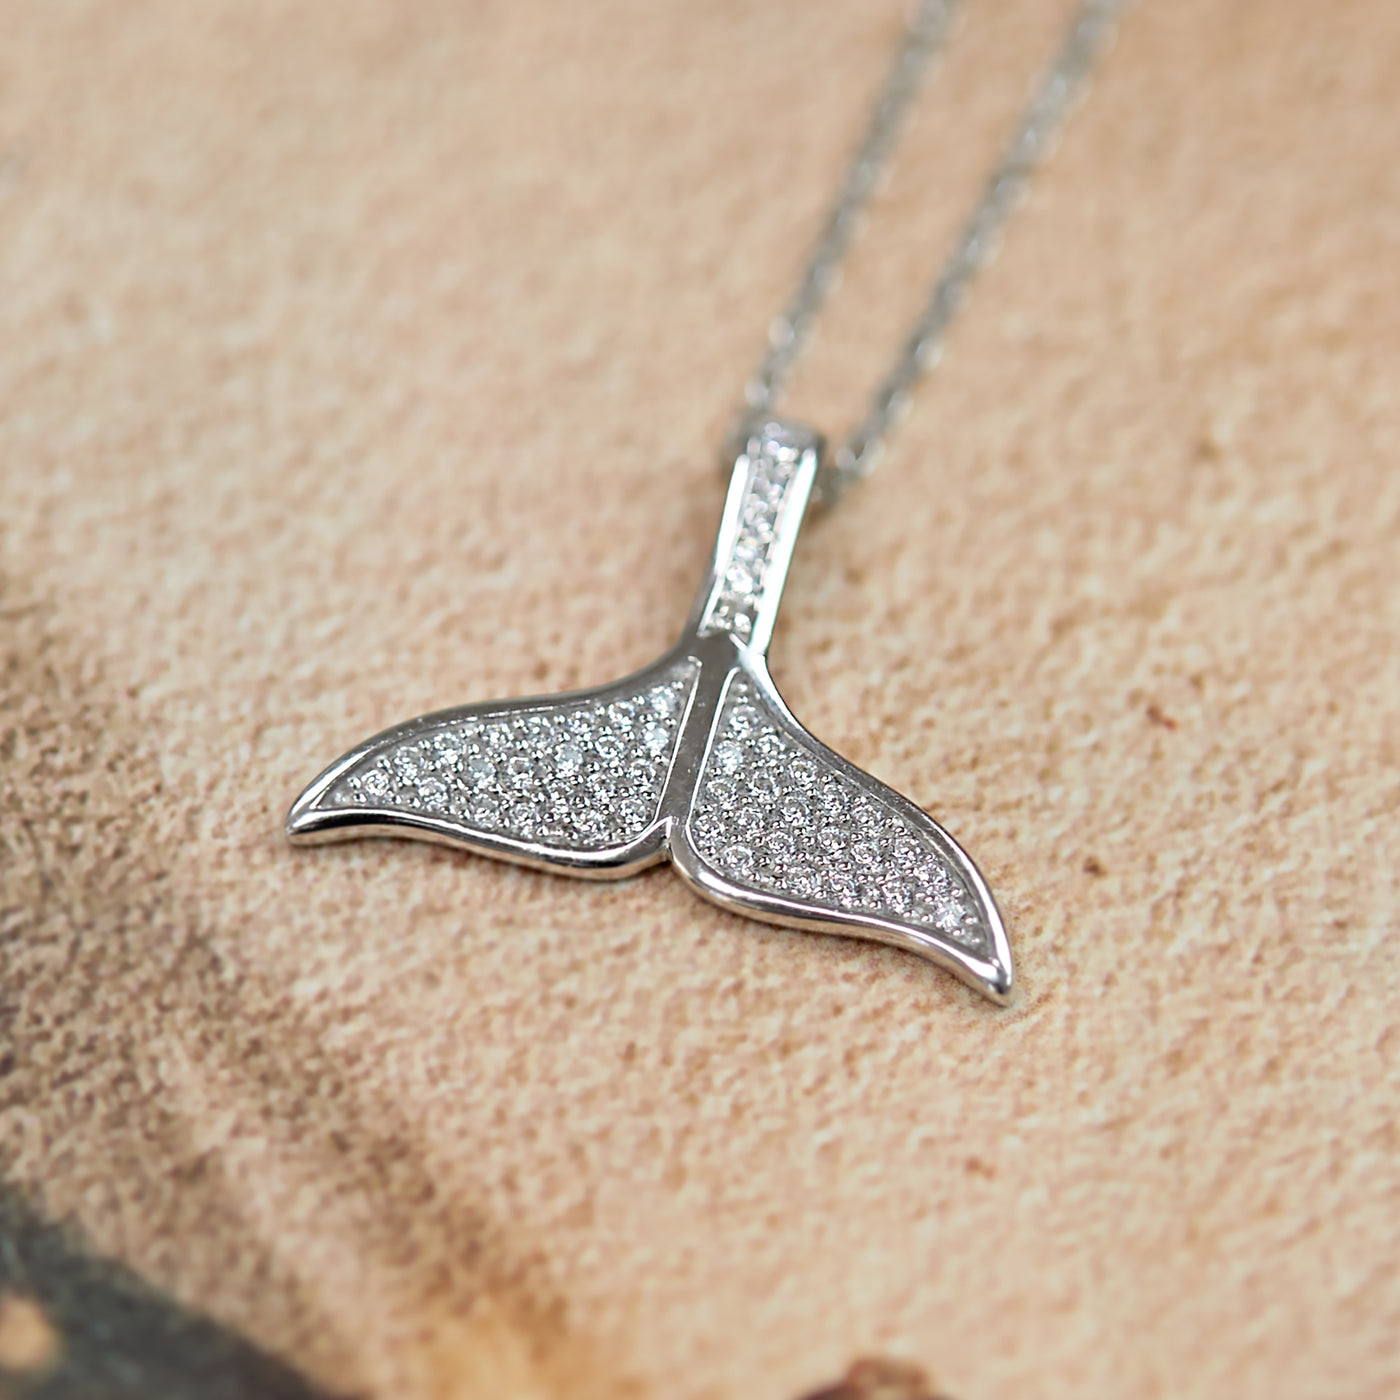 Whaletail Necklace